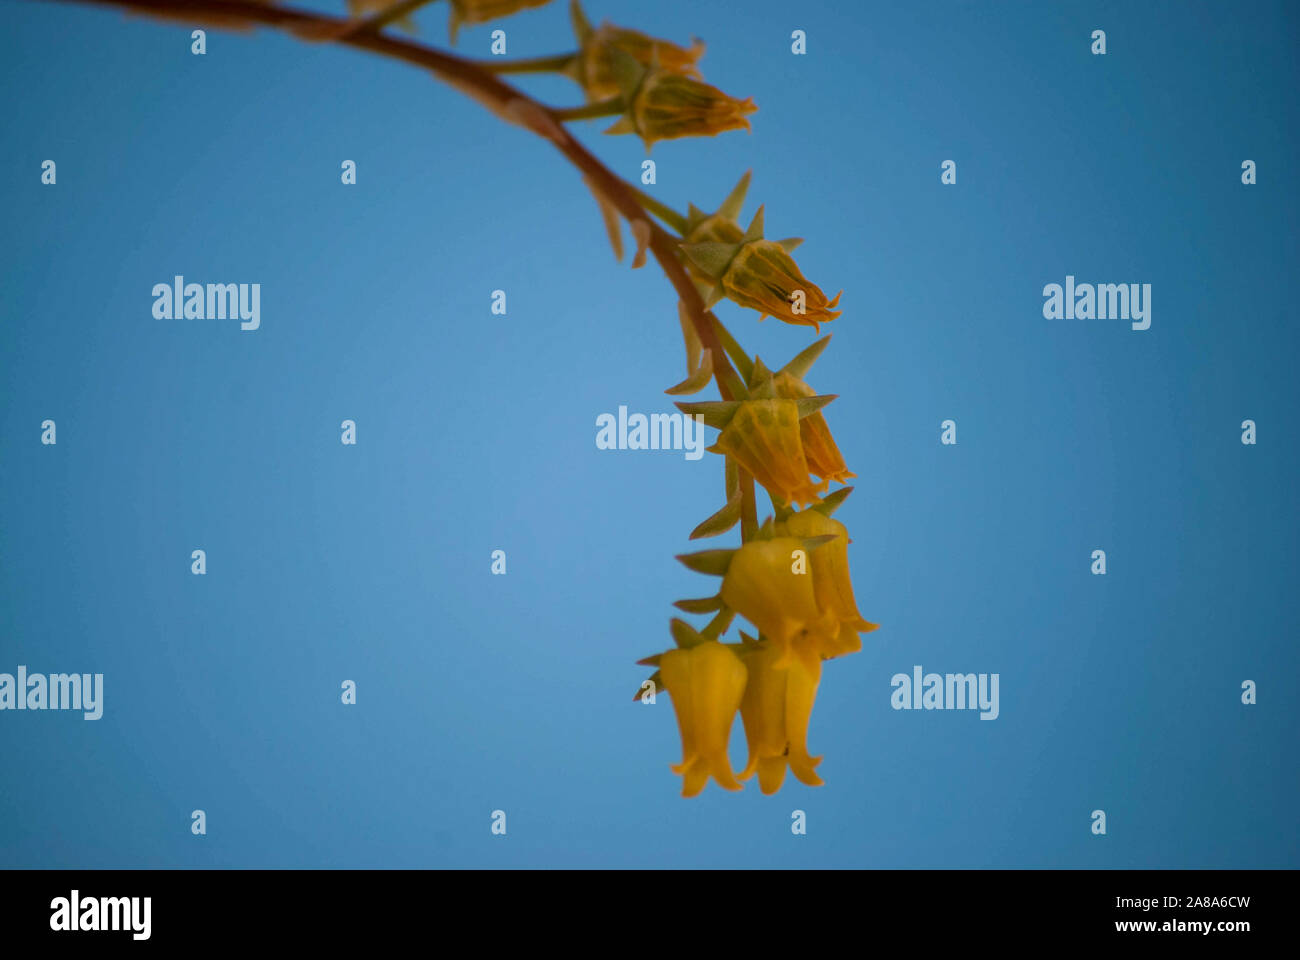 yellow flowers with blue background Stock Photo